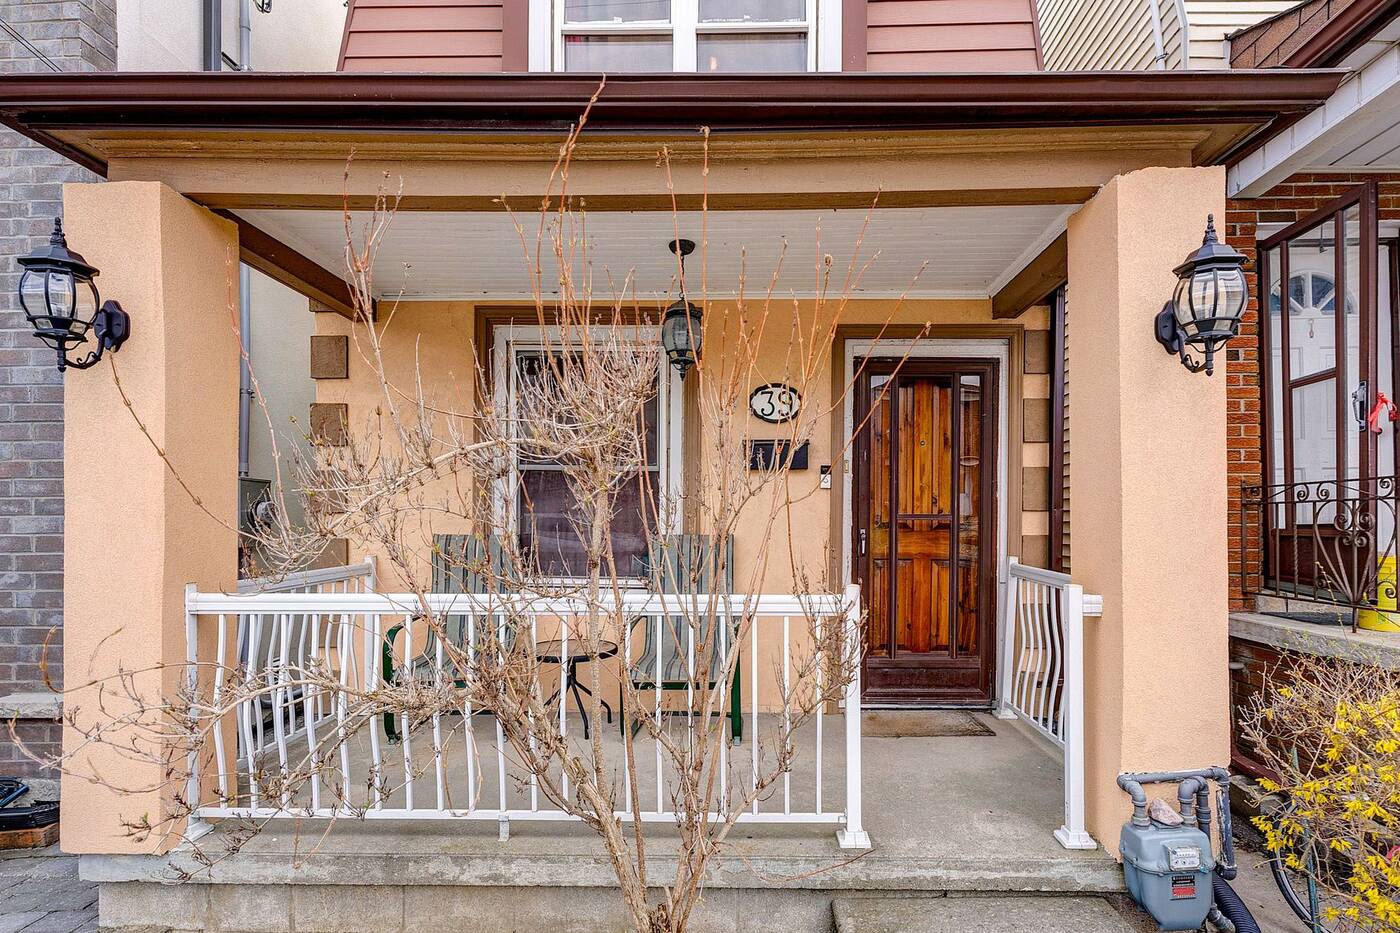 This Toronto home is a ’90s decor trip but a steal at only $600K